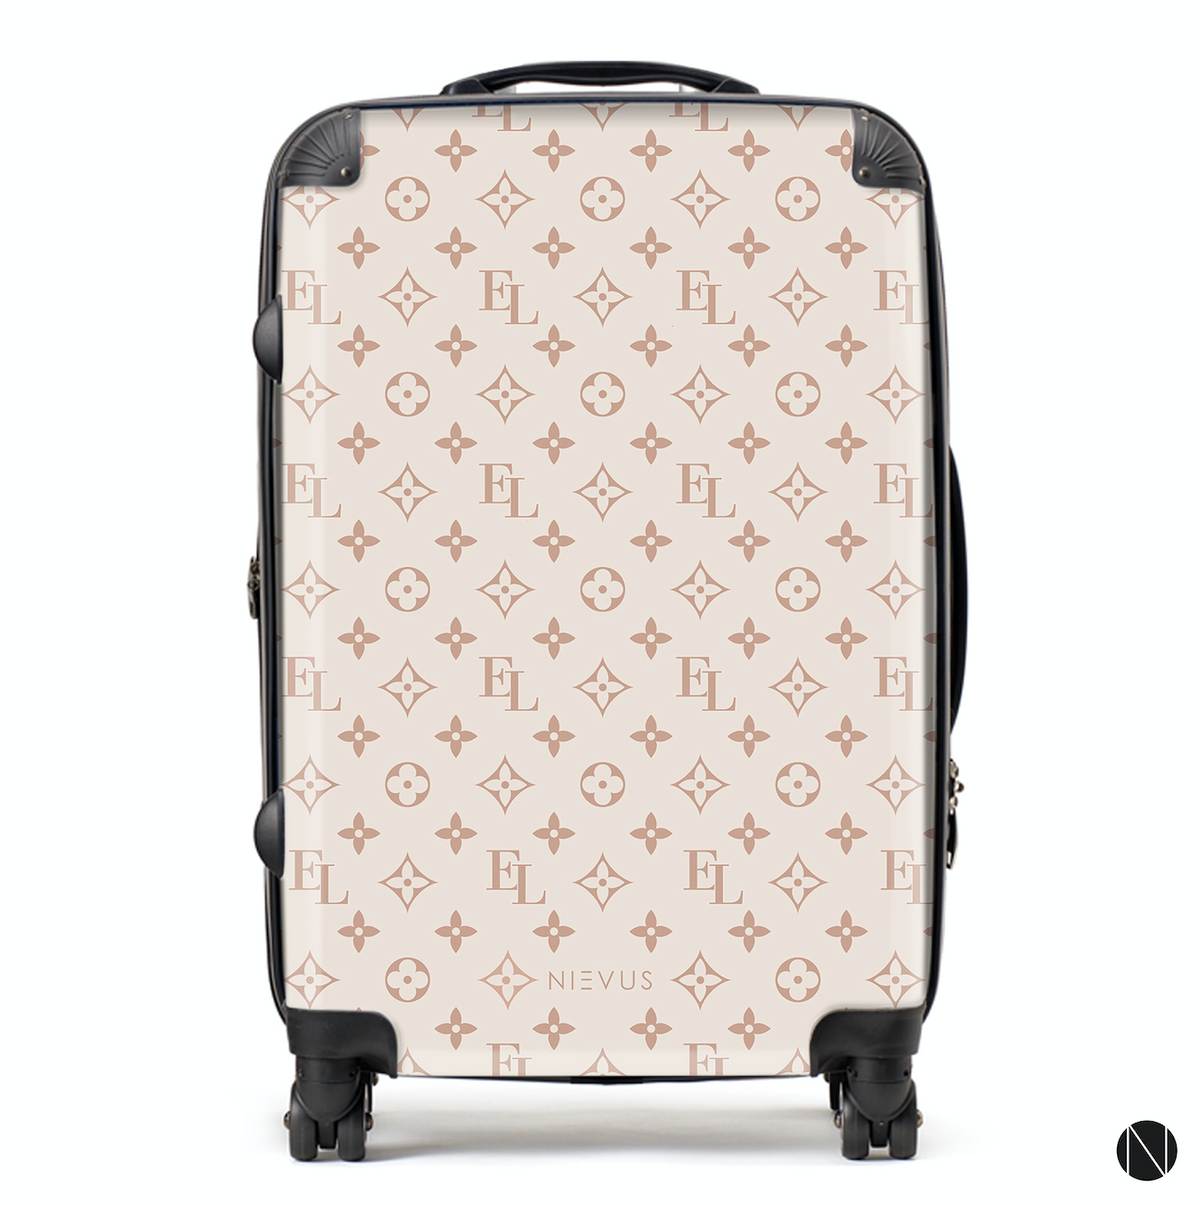 The Personalised Monogram Suitcase - Nude Edition